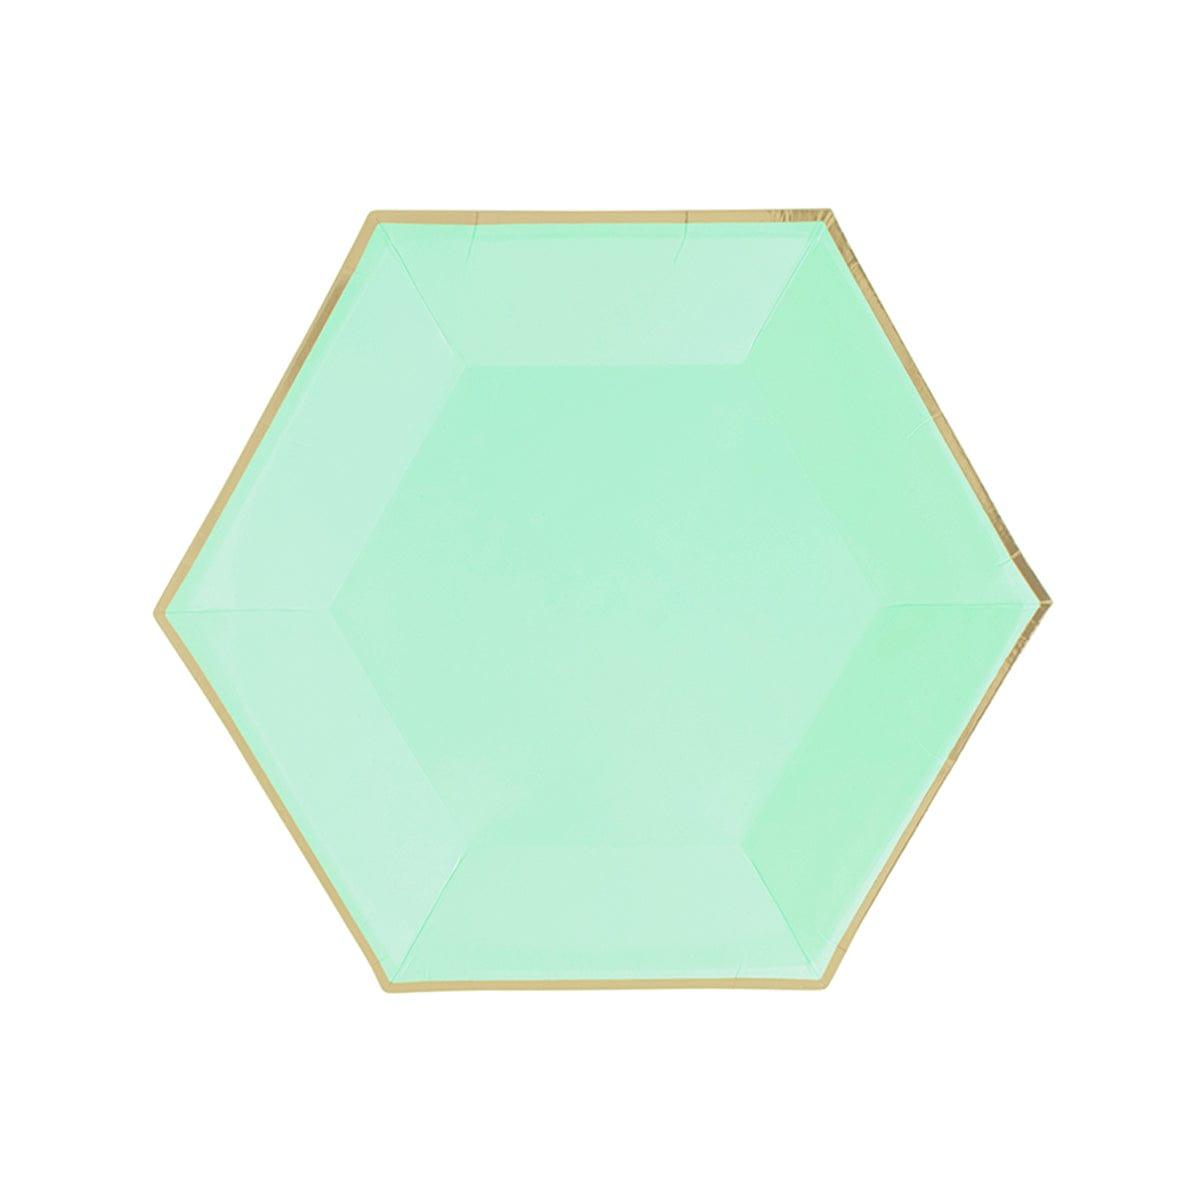 YIWU SANDY PAPER PRODUCTS CO., LTD Everyday Entertaining Hexagon Mint Green Plates, 7 Inches, 8 Count